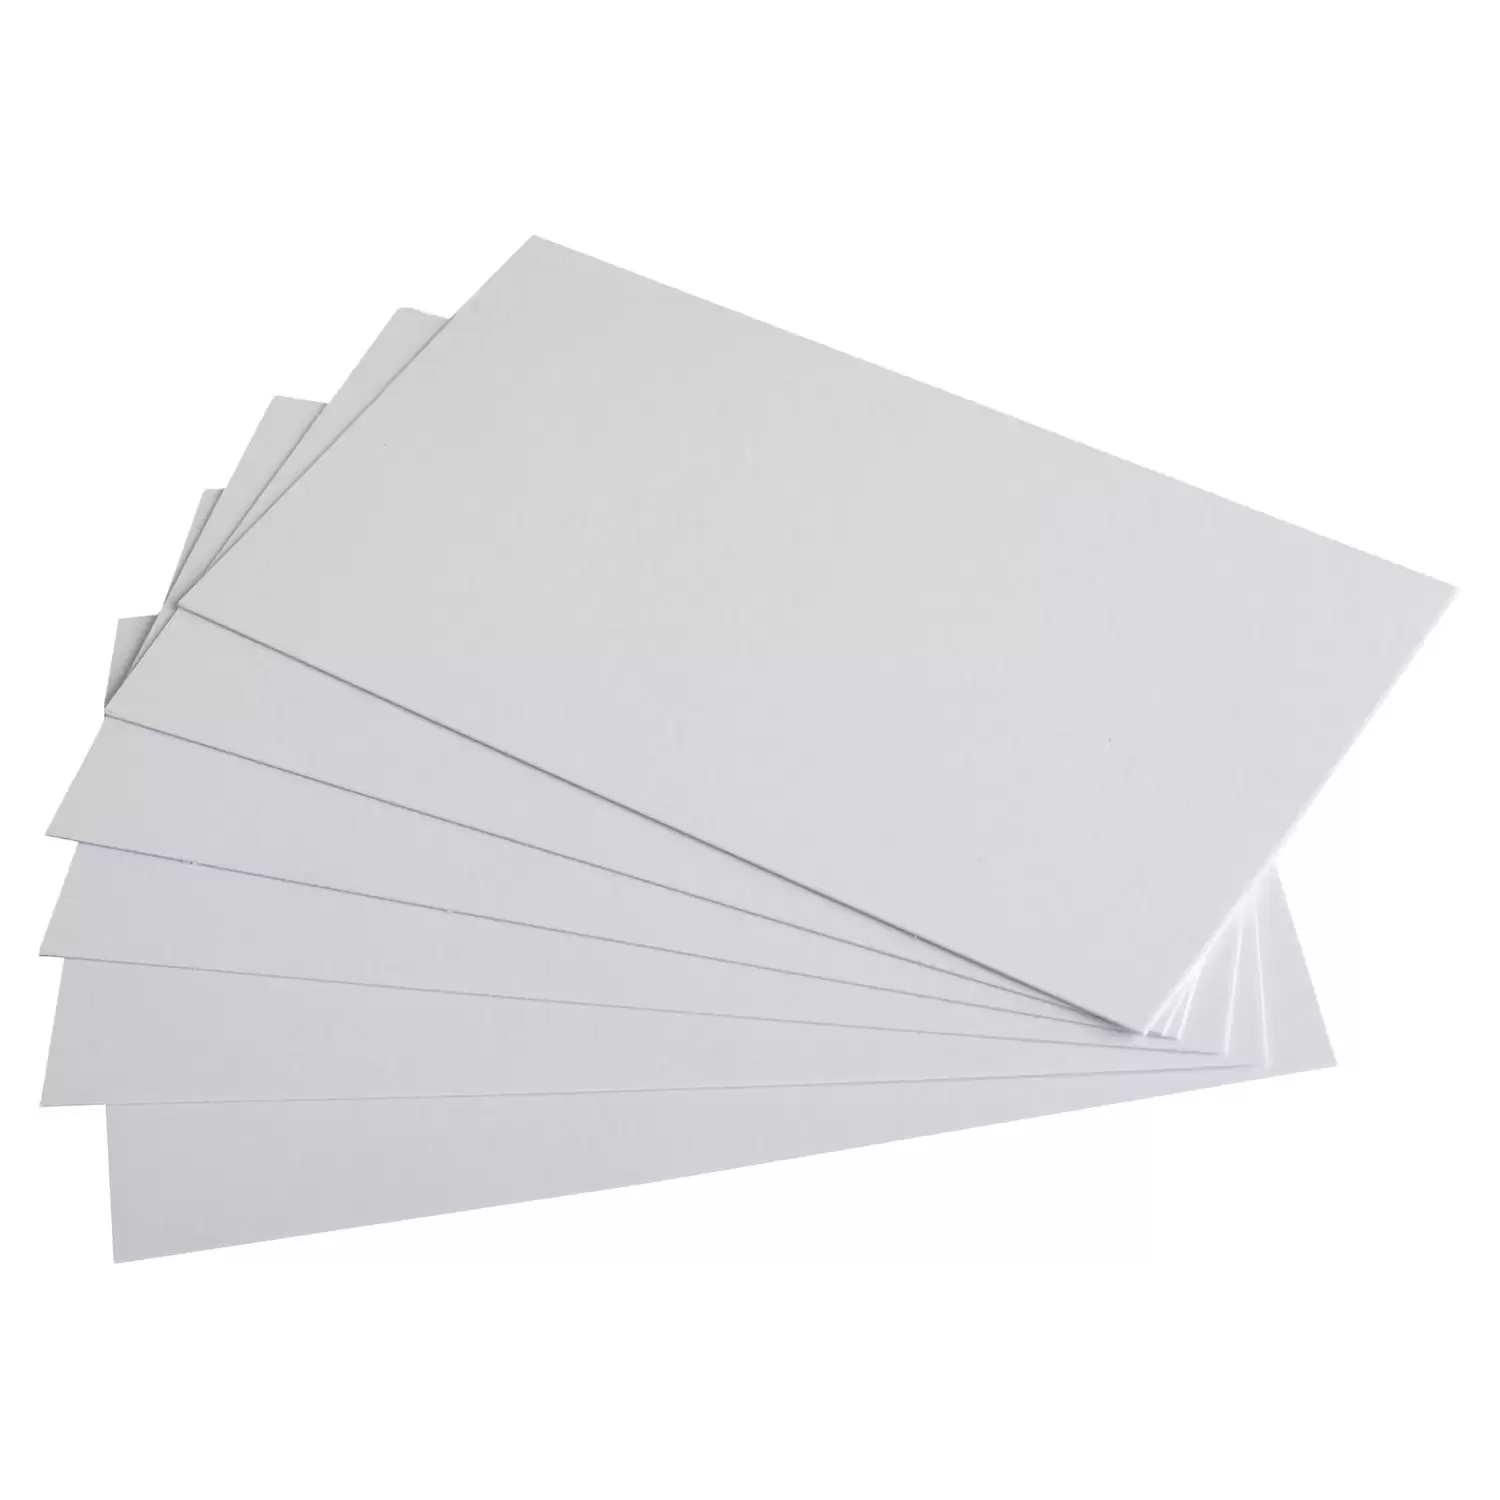 A3 White Card 180gsm 100 Pack - Gompels - Care & Nursery Supply Specialists